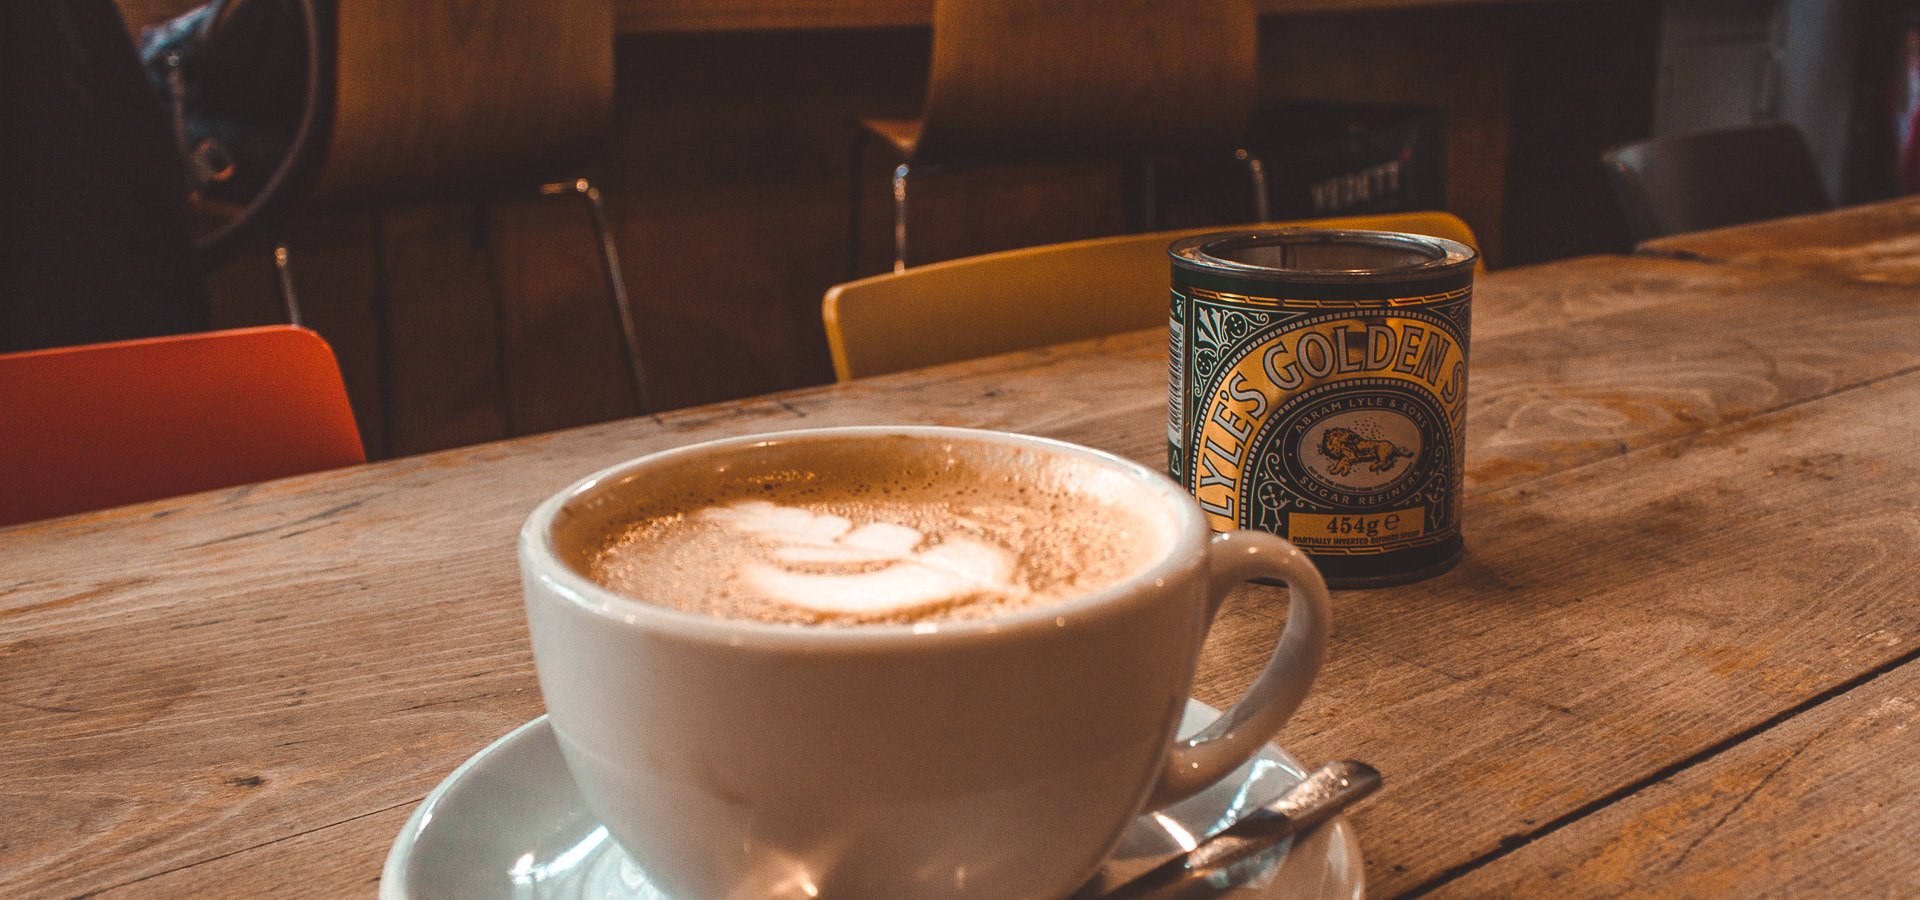 The Top 10 Cafes For Specialty Coffee In London | specialty coffee in london 1